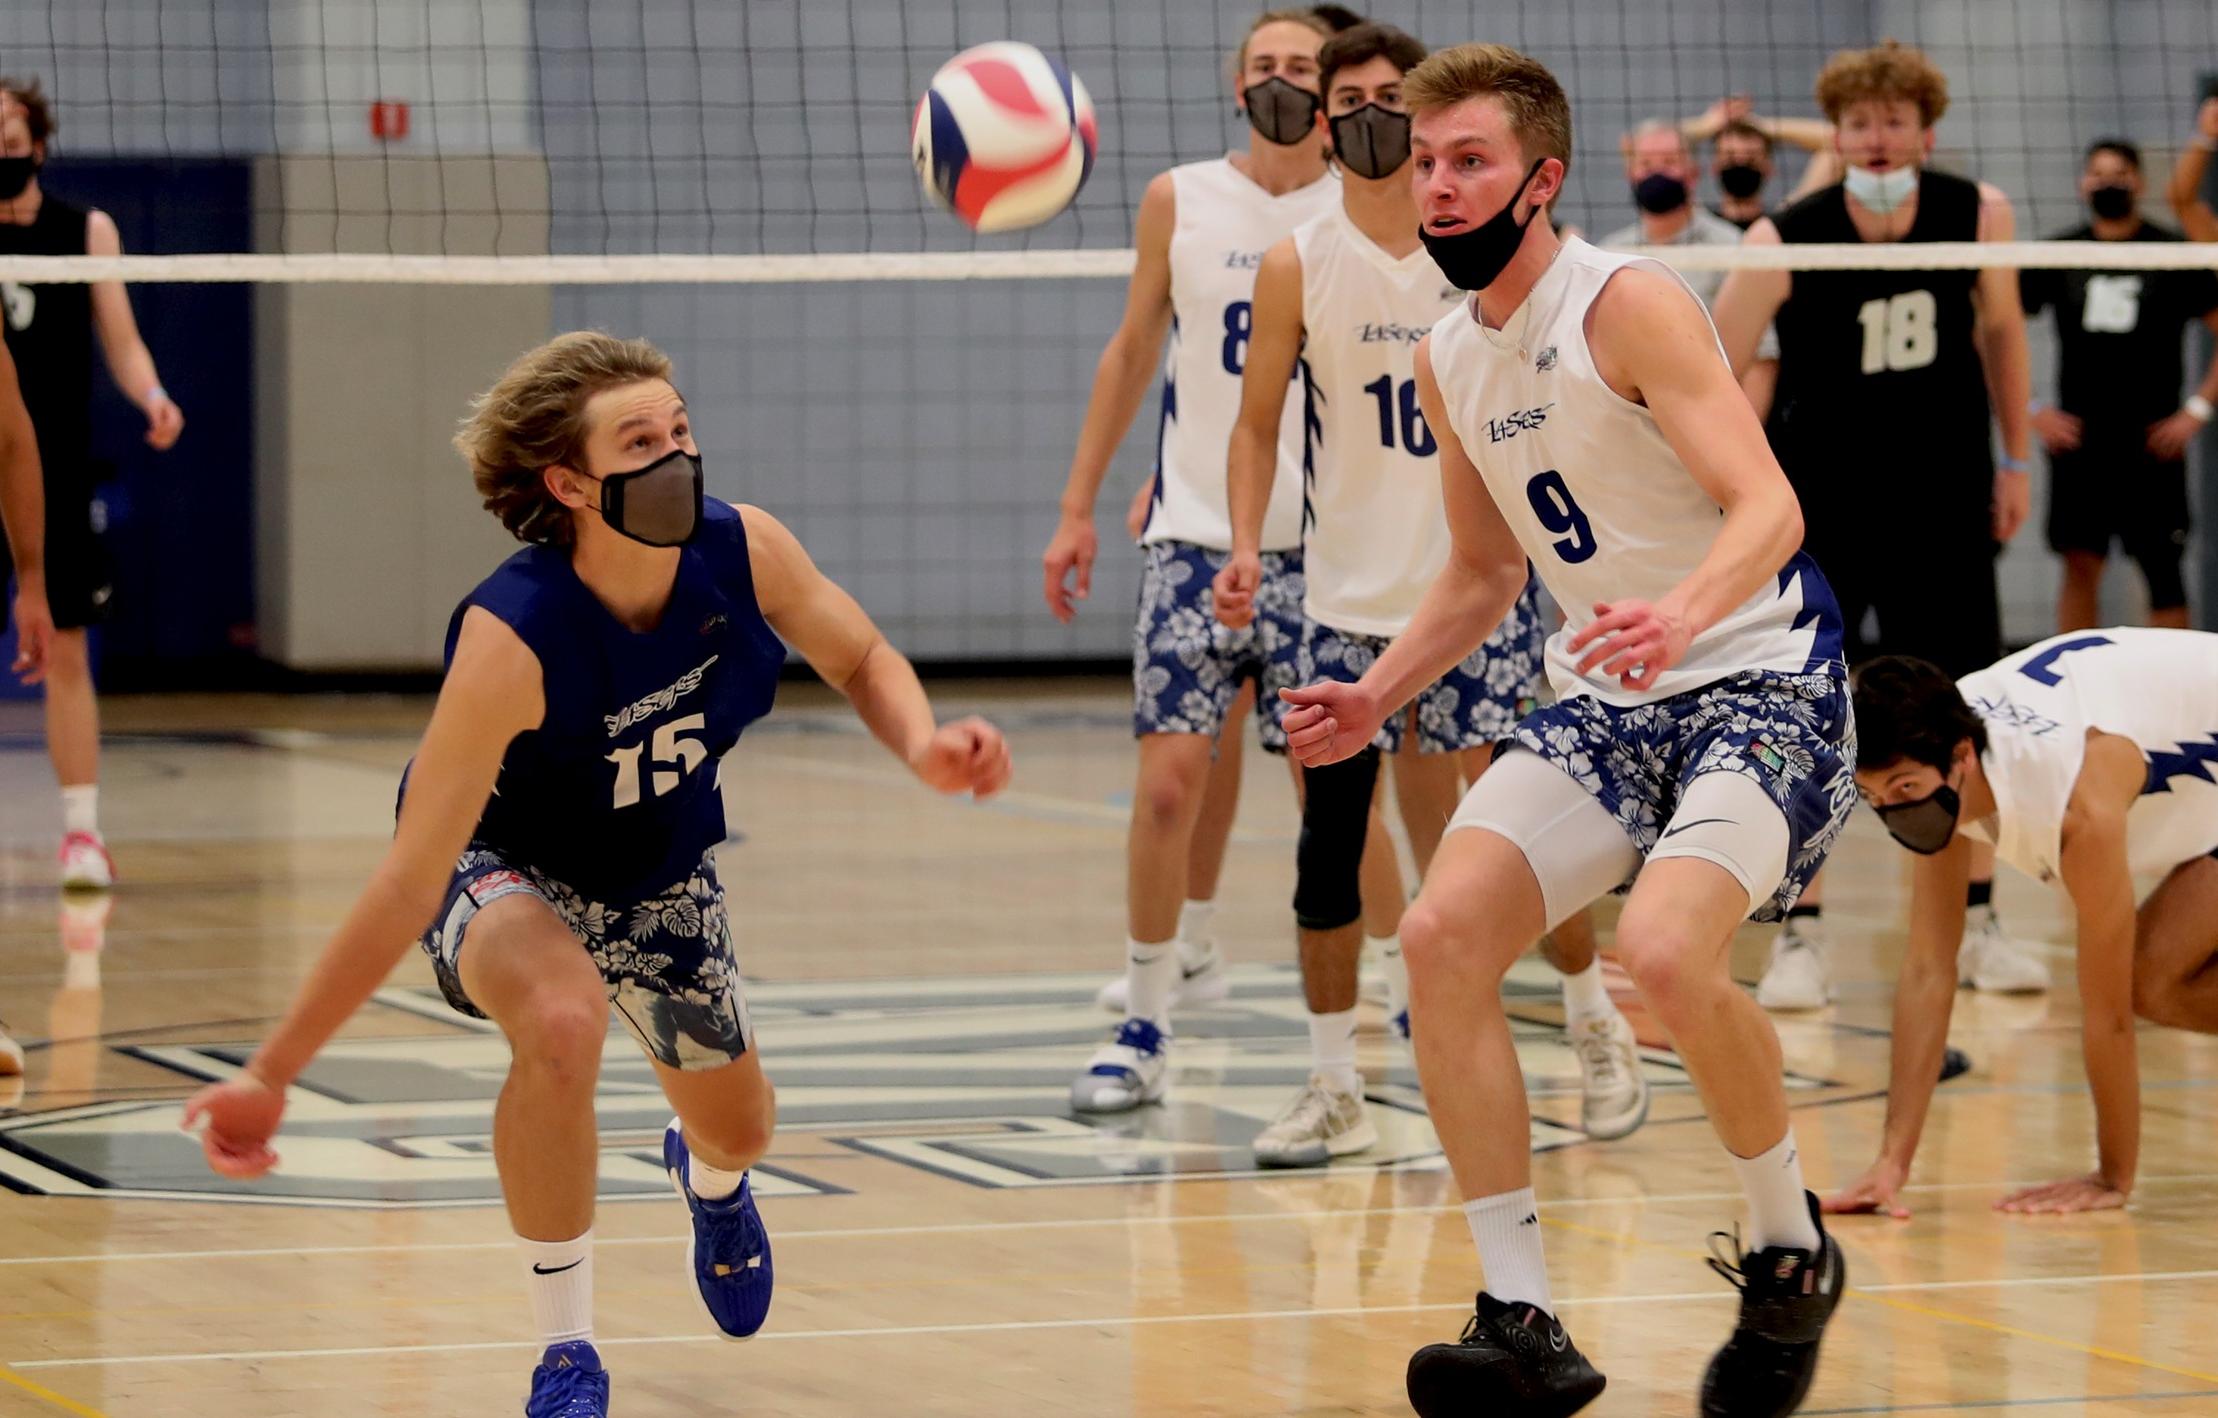 Men's volleyball team takes third in a row, sweeps Moorpark